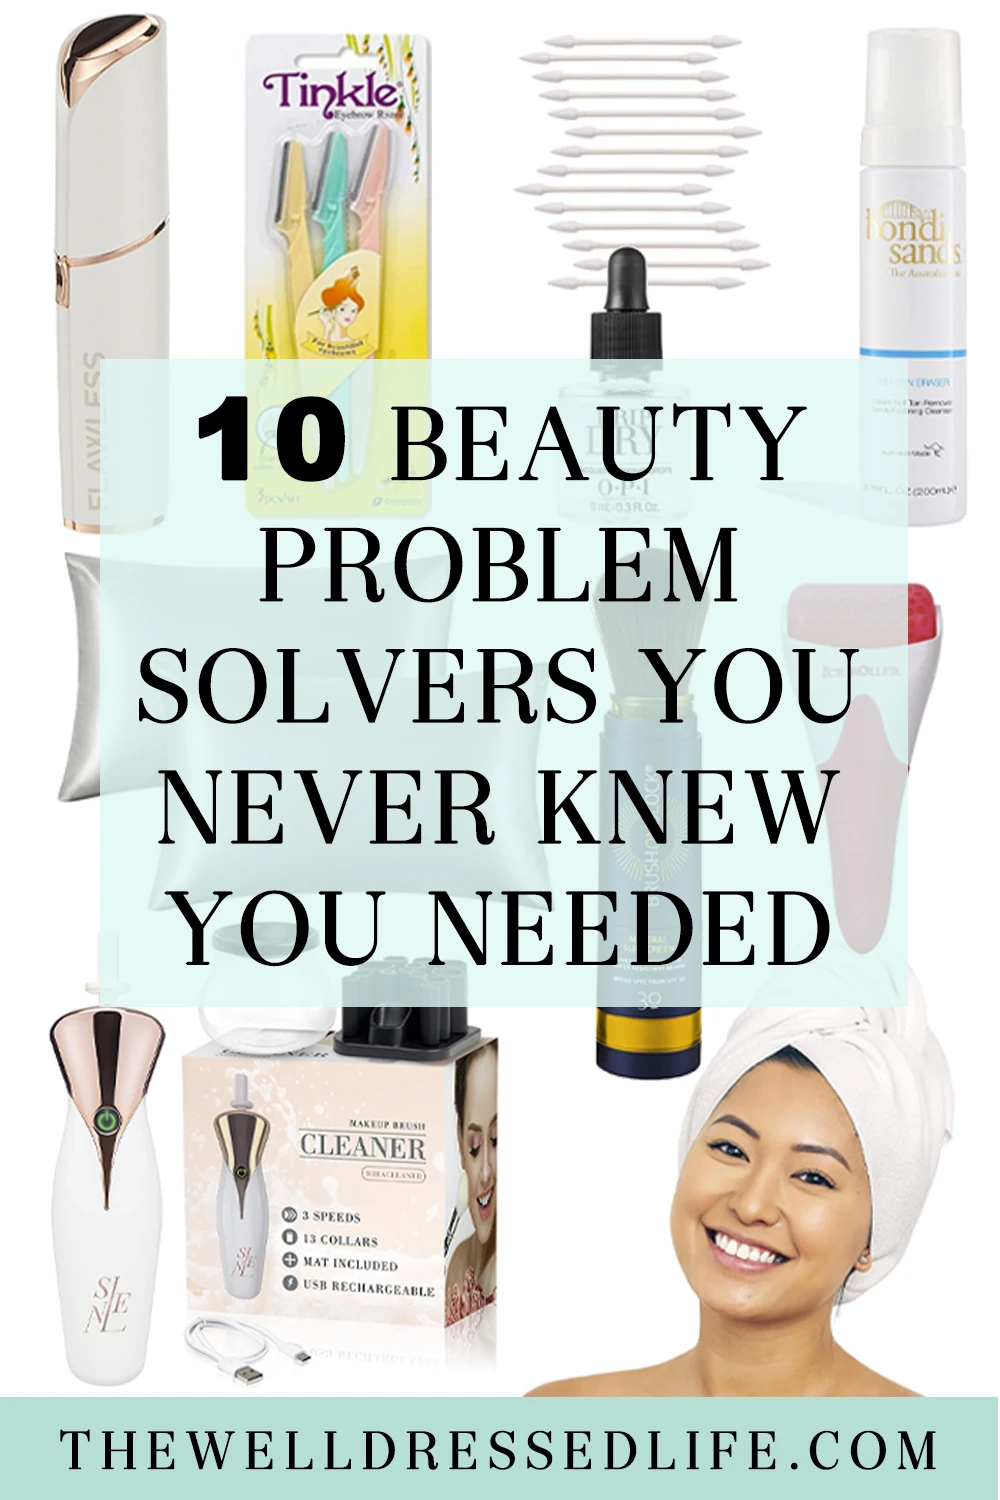 10 Beauty Problem Solvers You Never Knew You Needed